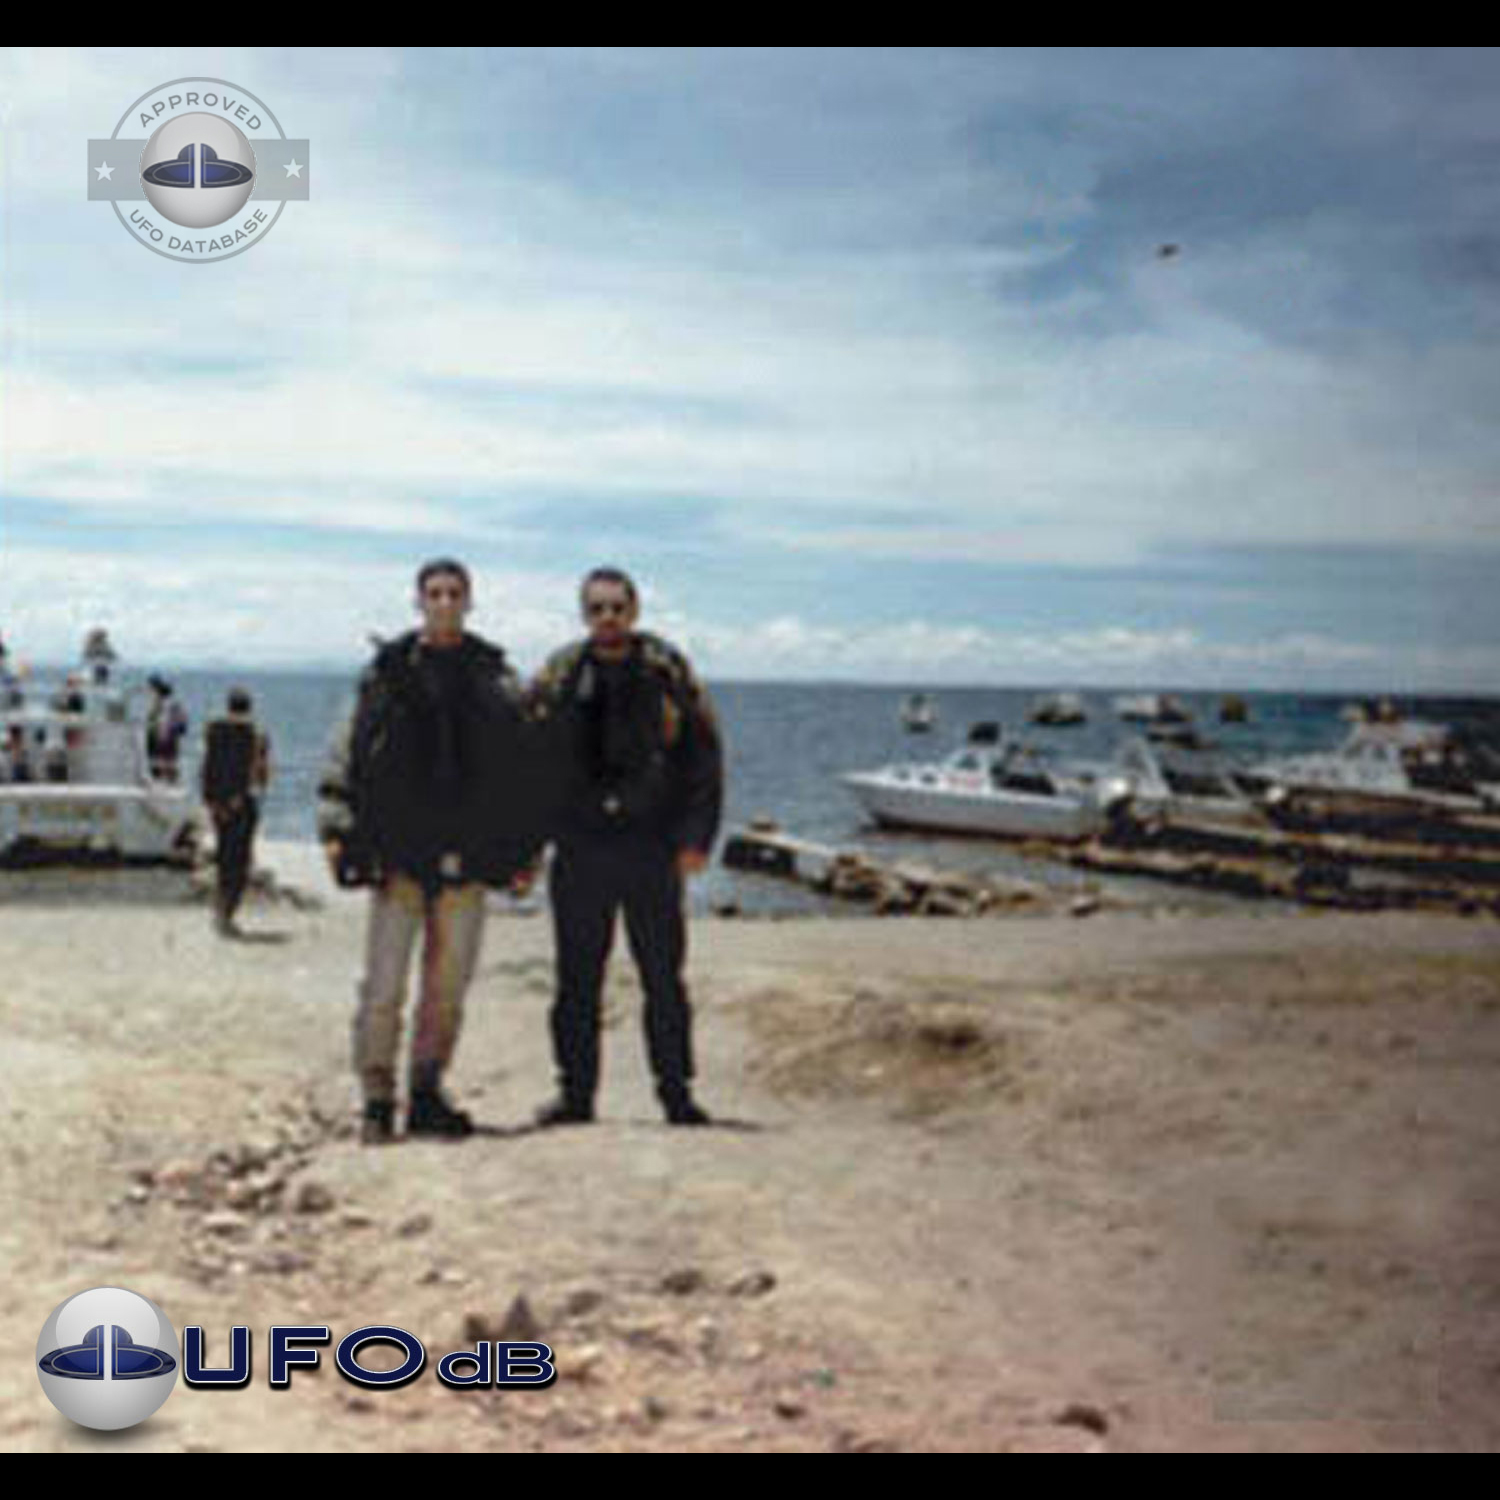 While taking a picture of 2 persons near lake Titicaca, capture a UFO UFO Picture #82-1